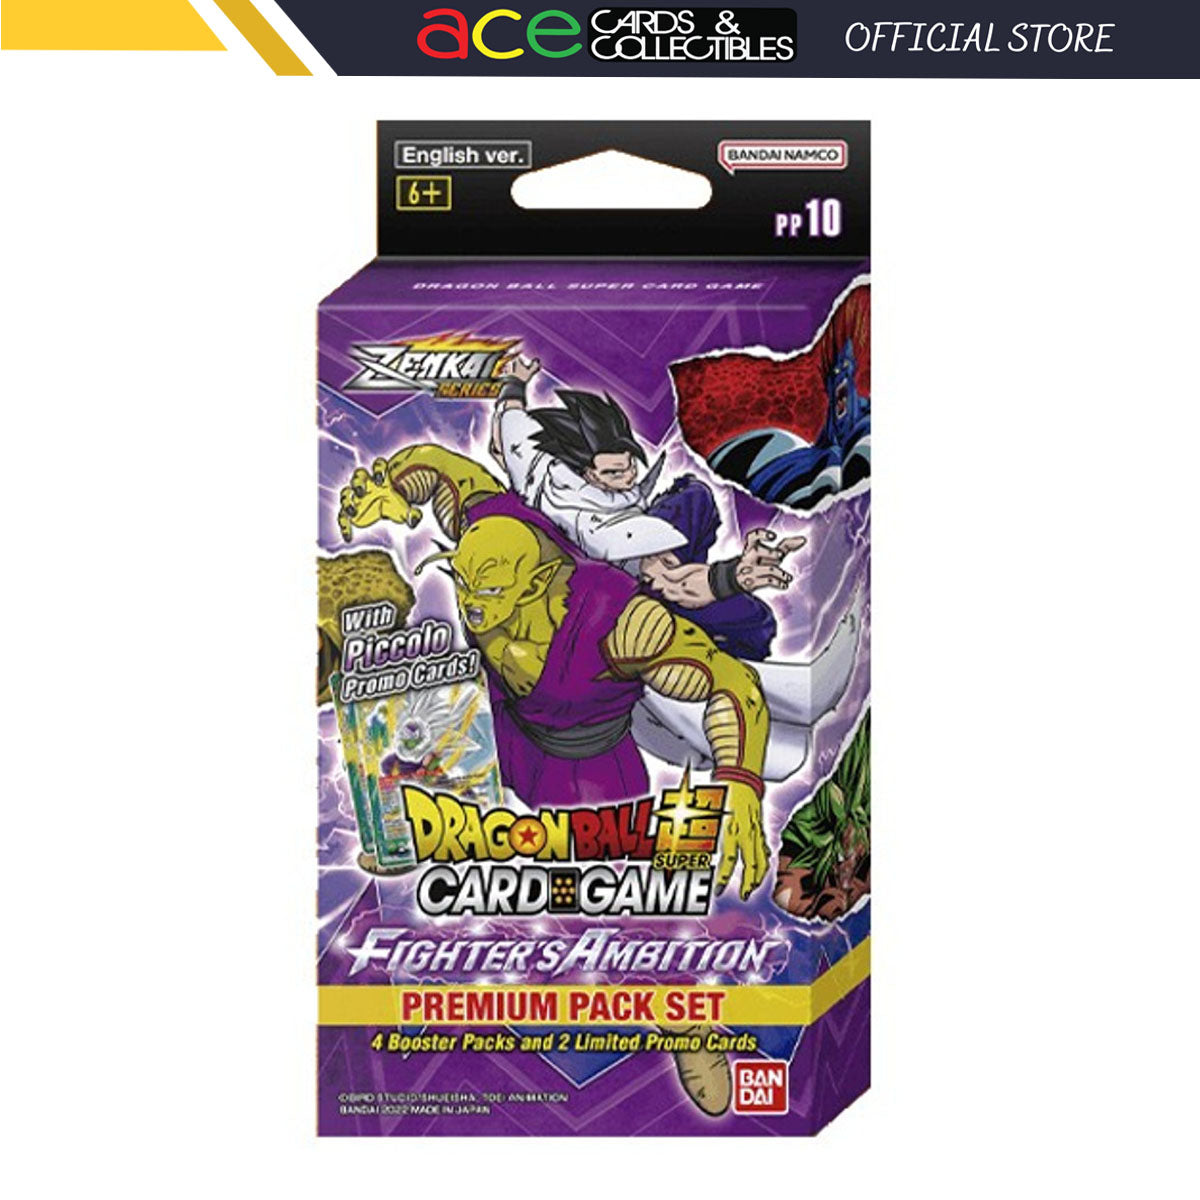 Dragon Ball Super TCG: Fighter's Ambition Premium Pack Set [PP10]-Bandai-Ace Cards & Collectibles